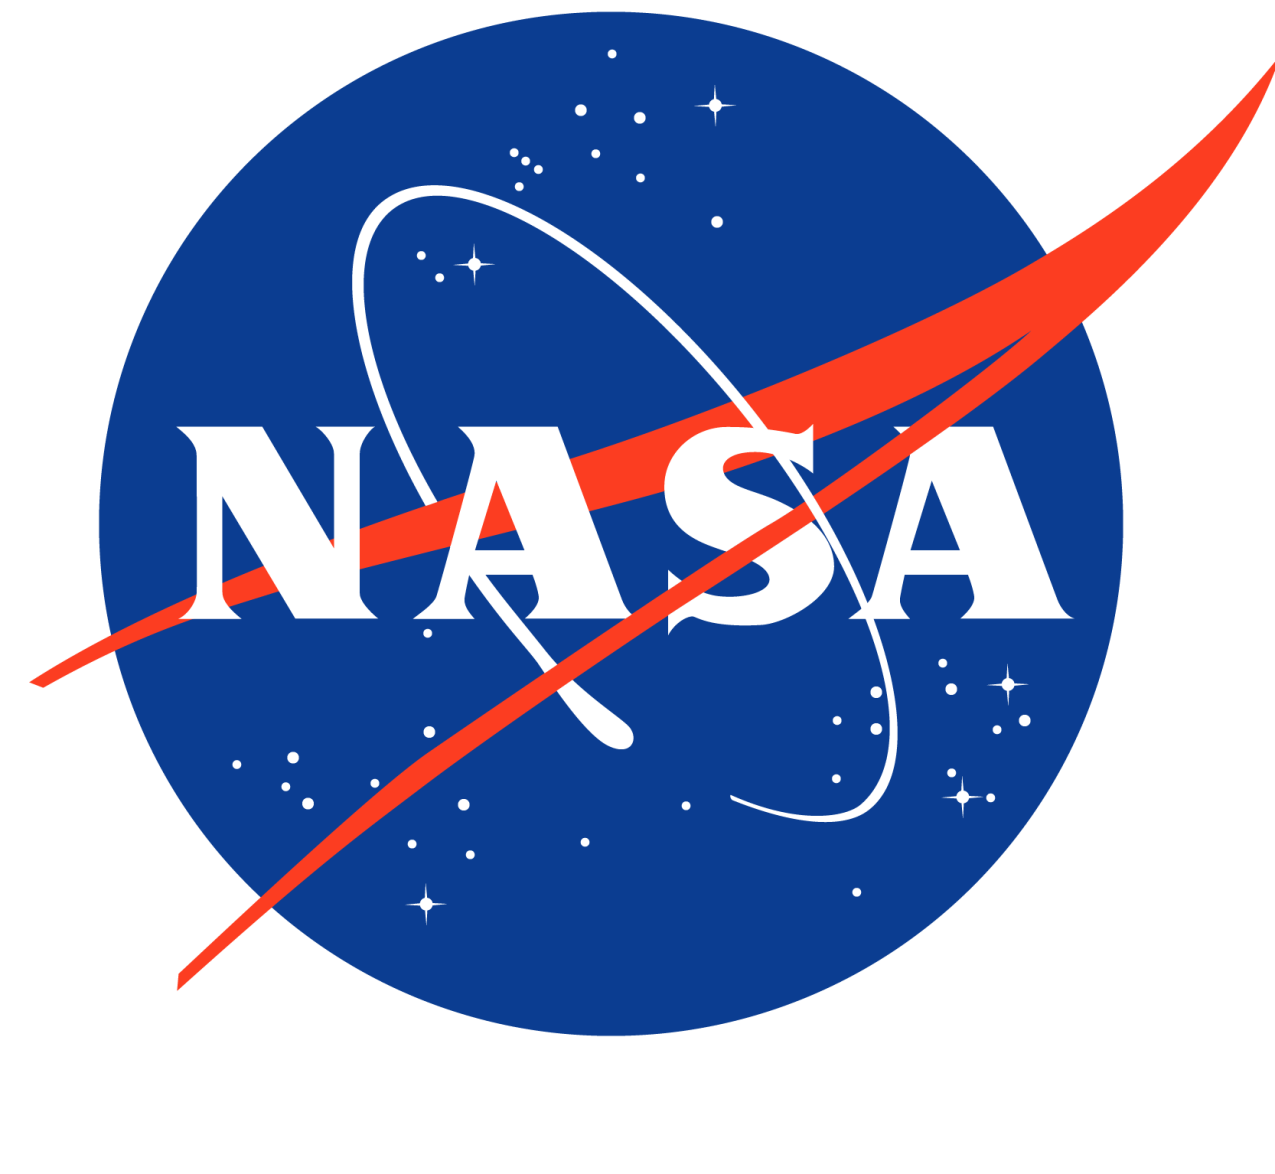 Image of NASA logo a deep blue circle with a field of stars scattered about behind the acronym NASA with a white ring orbiting the words and a red swooshed arrow behind and infront of the text